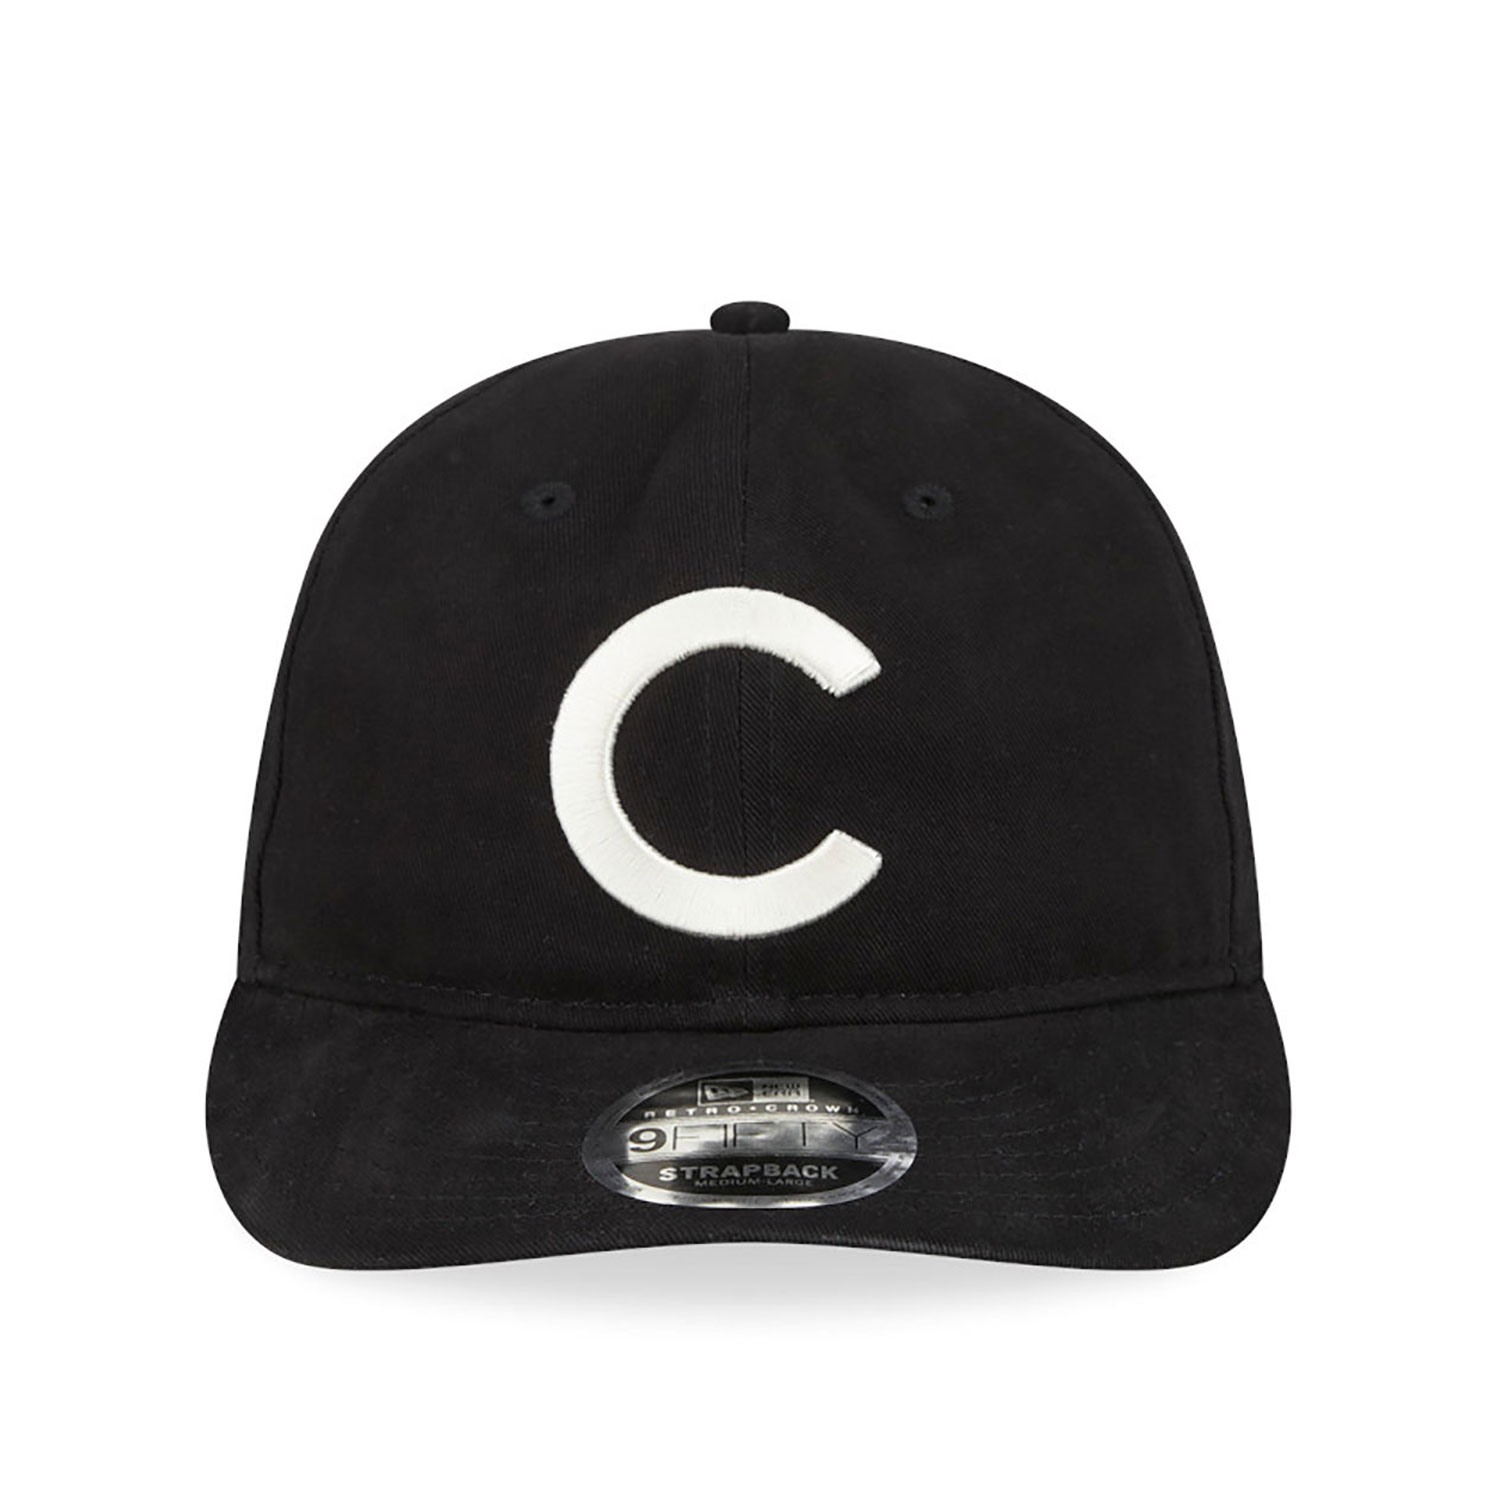 Chicago Cubs MLB Cooperstown Black Retro Crown 9FIFTY Strapback Cap